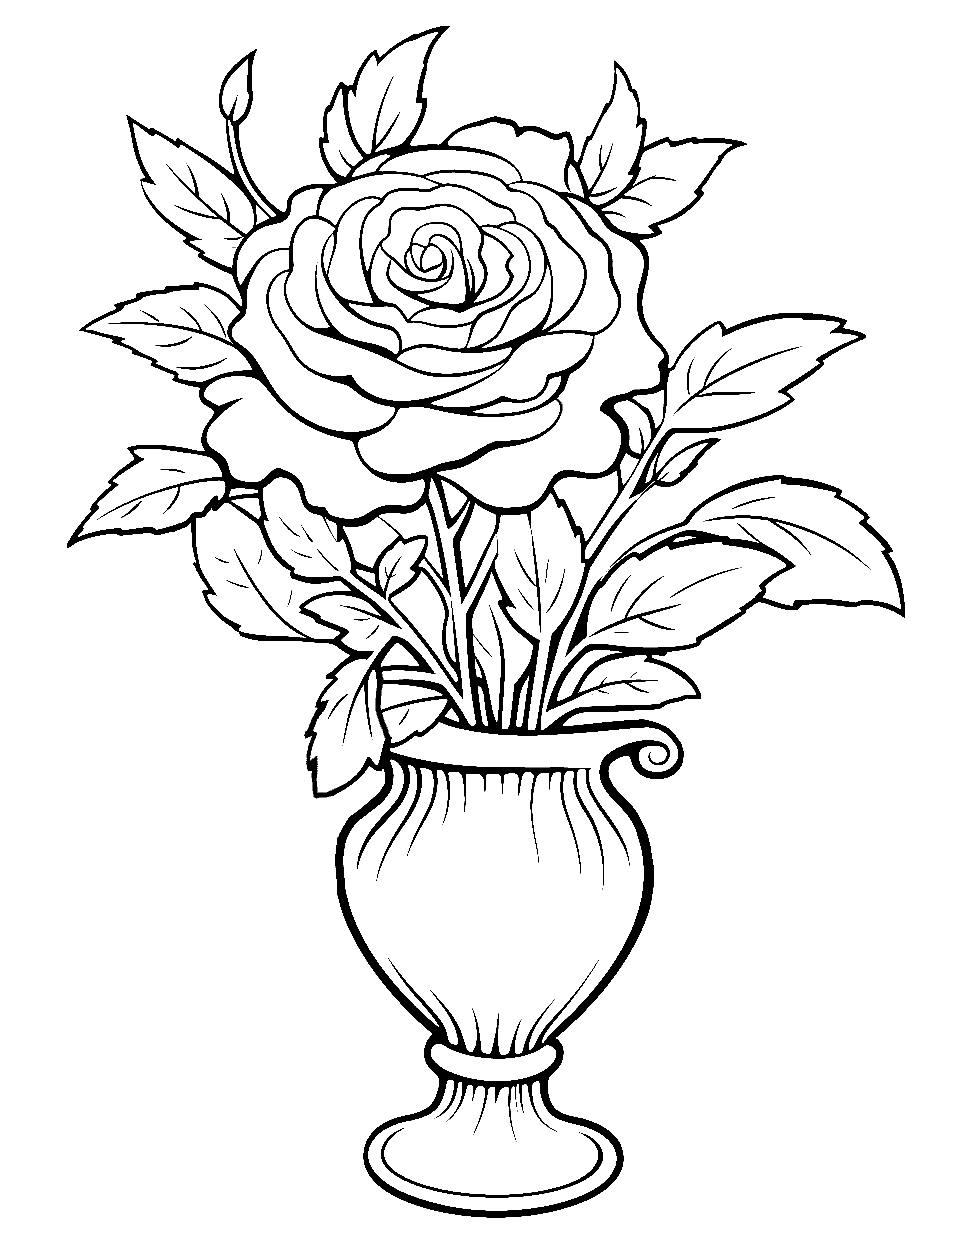 Rose in a Vase Coloring Page - A detailed depiction of a rose standing tall in an elegant vase.